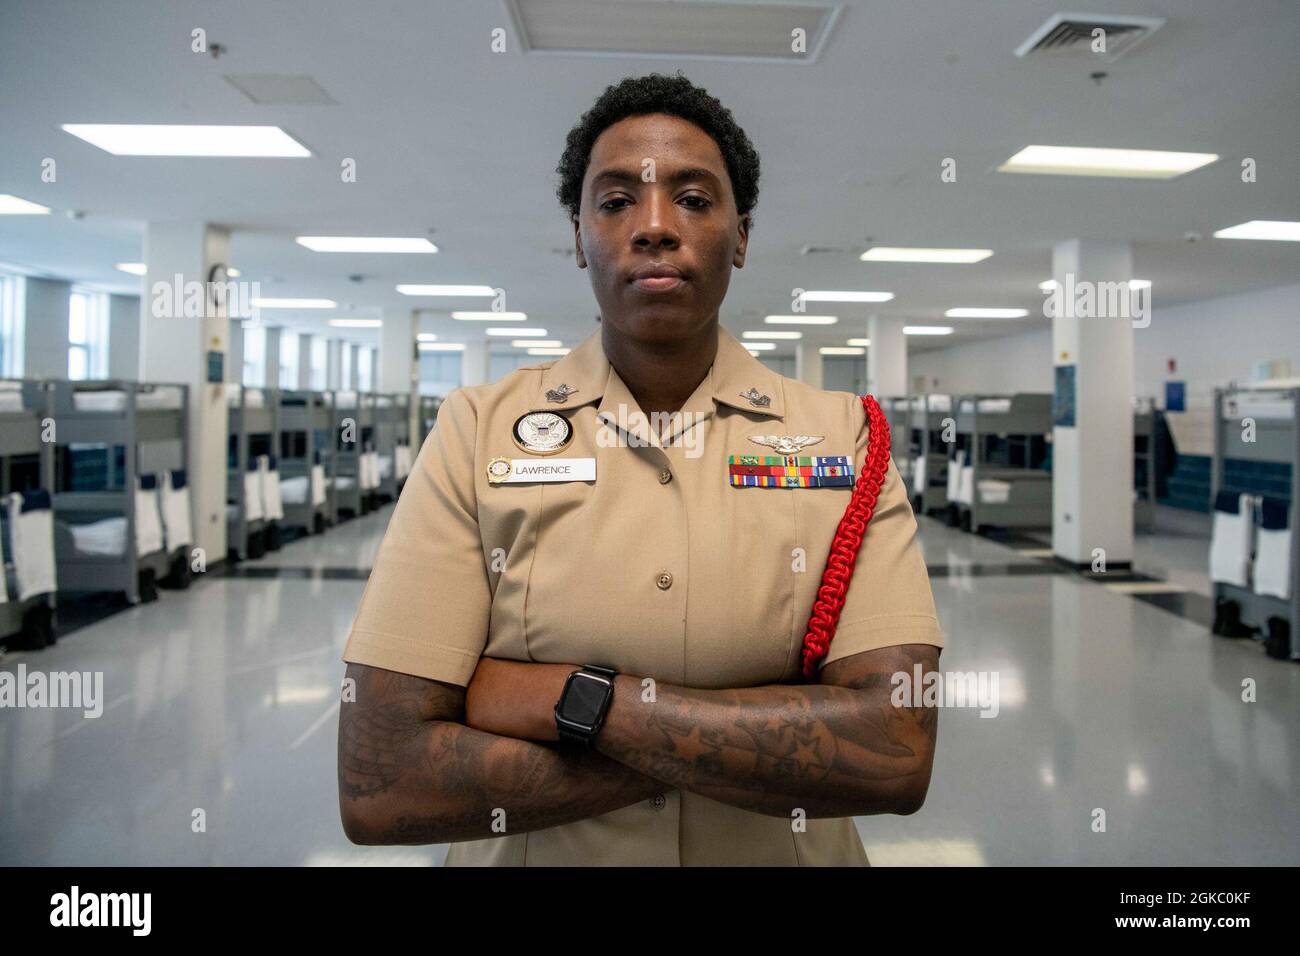 Aviation Machinist’s Mate 1st Class Latasha Lawrence, a recruit division commander, poses for a portrait inside the USS Triton recruit barracks at Recruit Training Command. More than 40,000 recruits train annually at the Navy’s only boot camp. Stock Photo